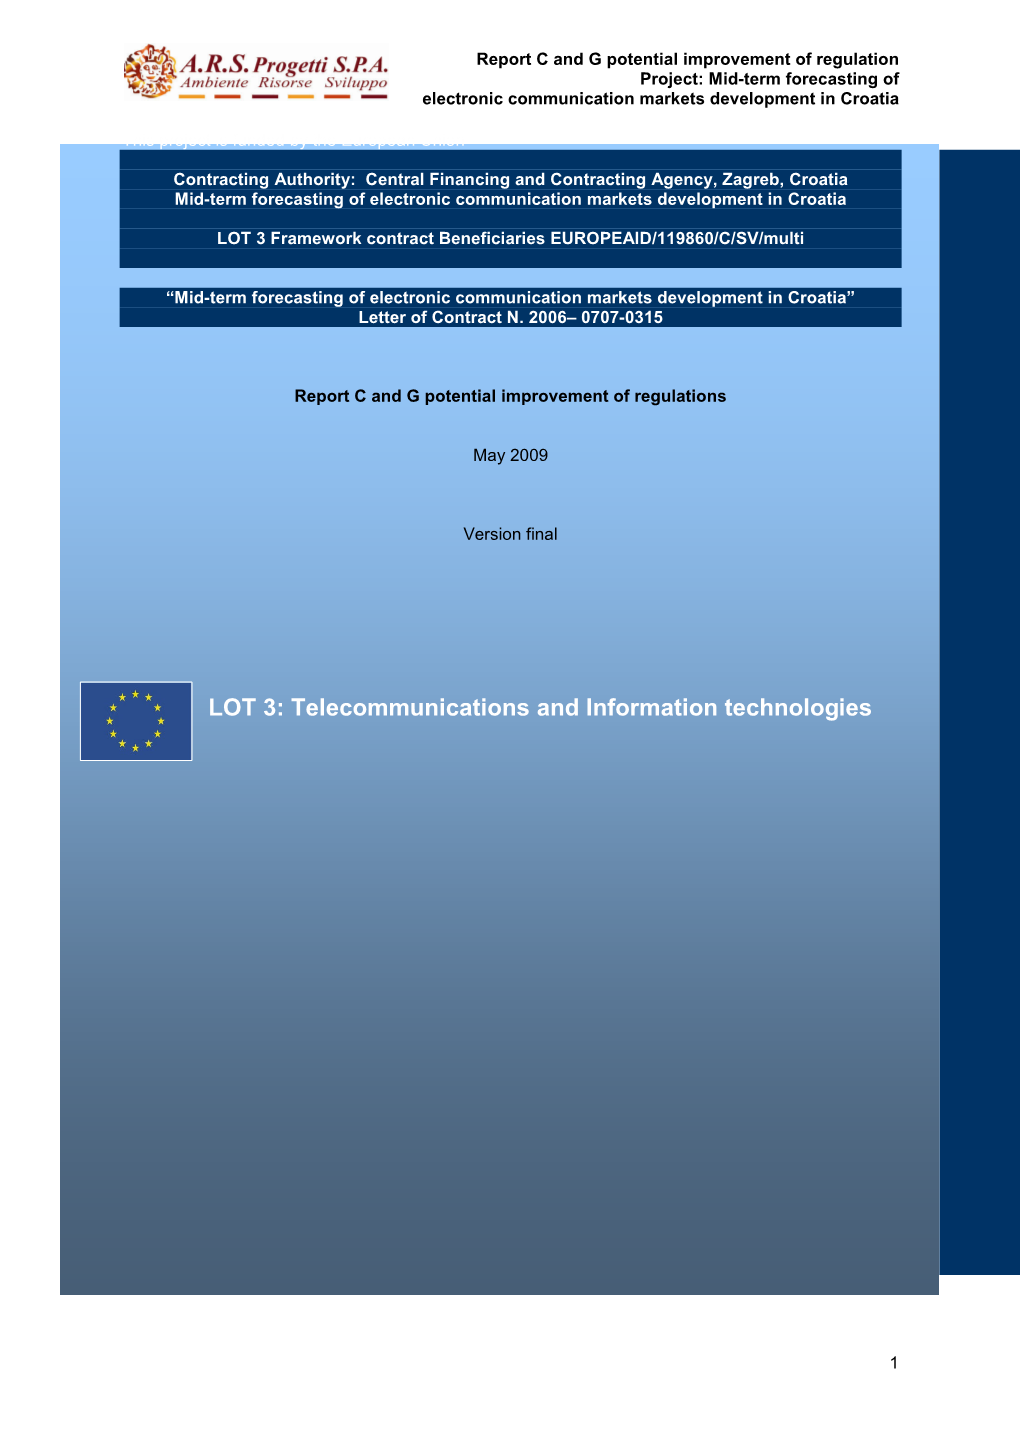 Telecommunications and Information Technologies